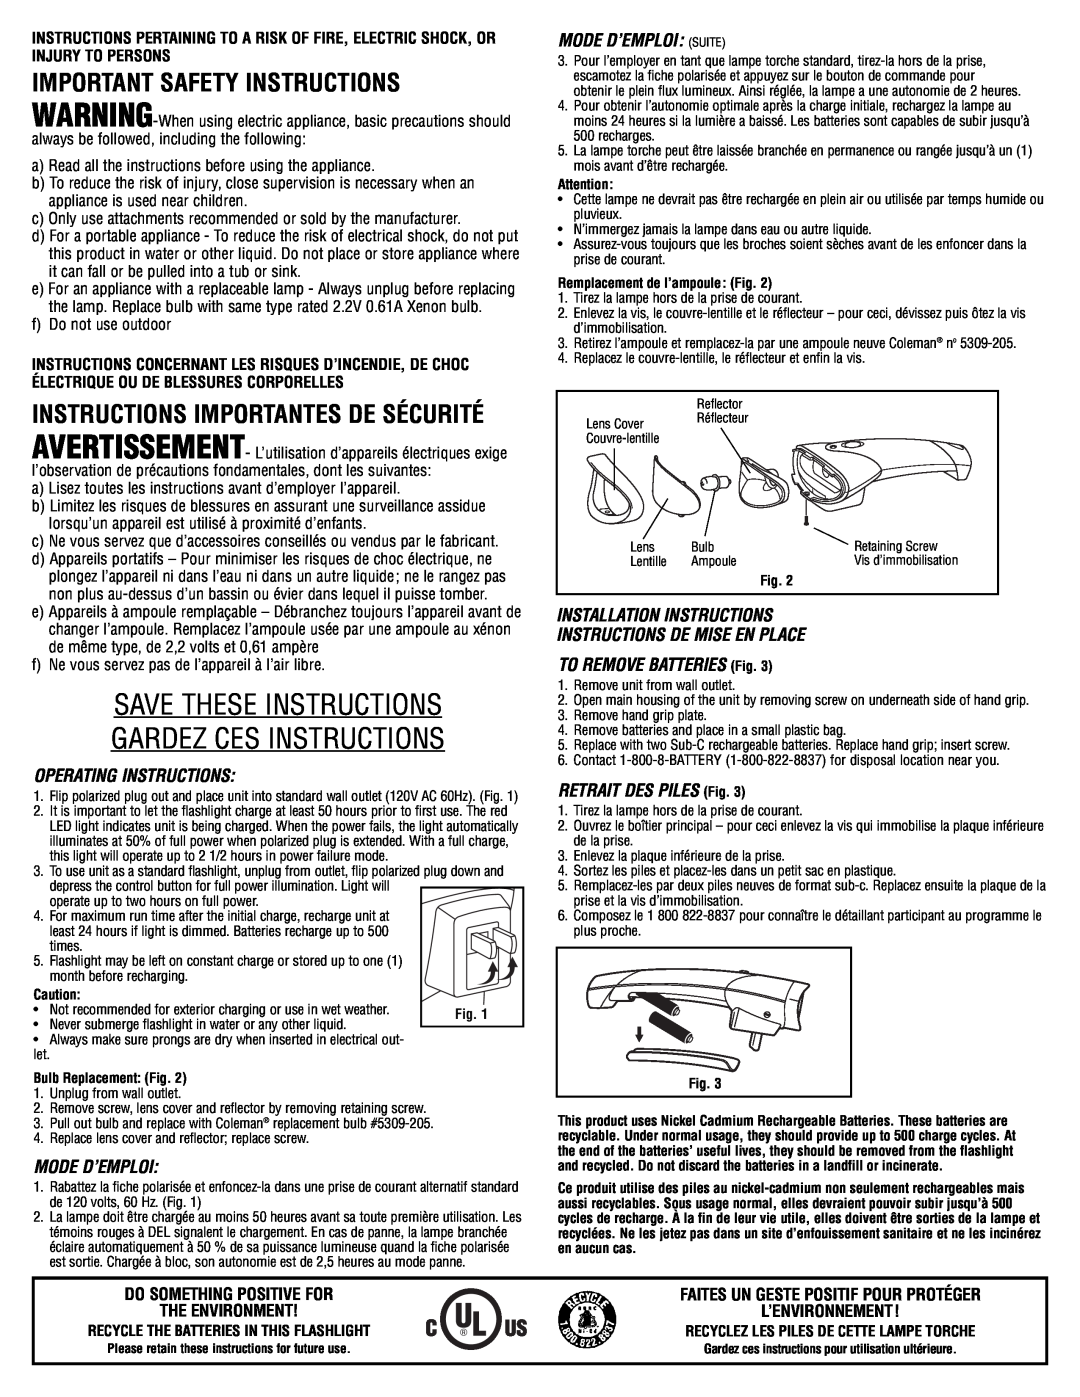 Coleman 5306 warranty Important Safety Instructions, Instructions Importantes De Sécurité, Mode D’Emploi Suite 